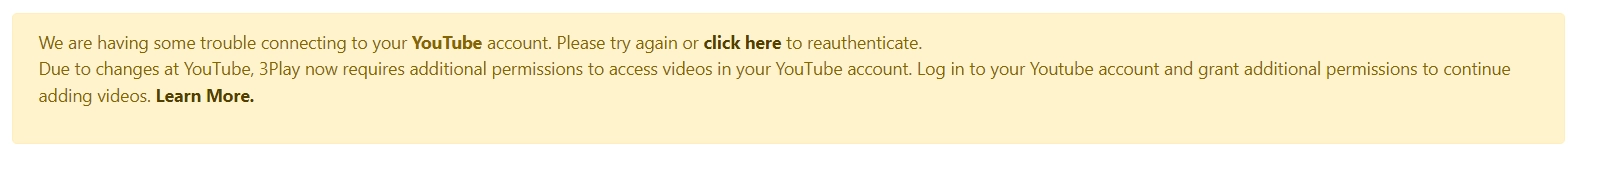 Error message in 3Play Media that an account needs to be reauthenticated.